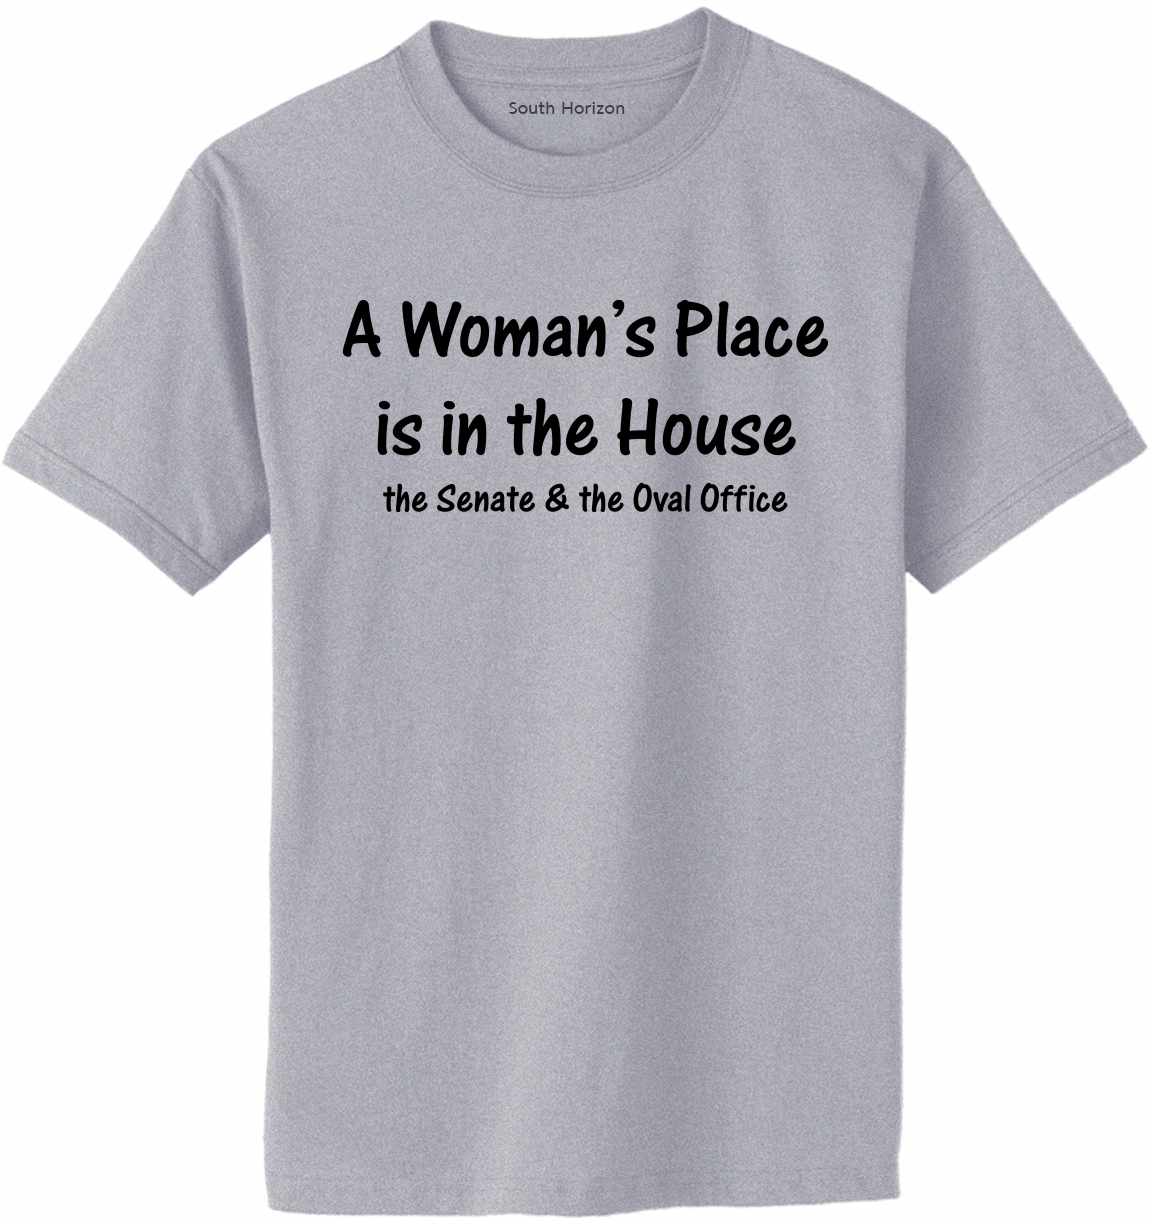 A Woman's Place Is in The House, The Senate & The Oval Office Adult T-Shirt (#510-1)